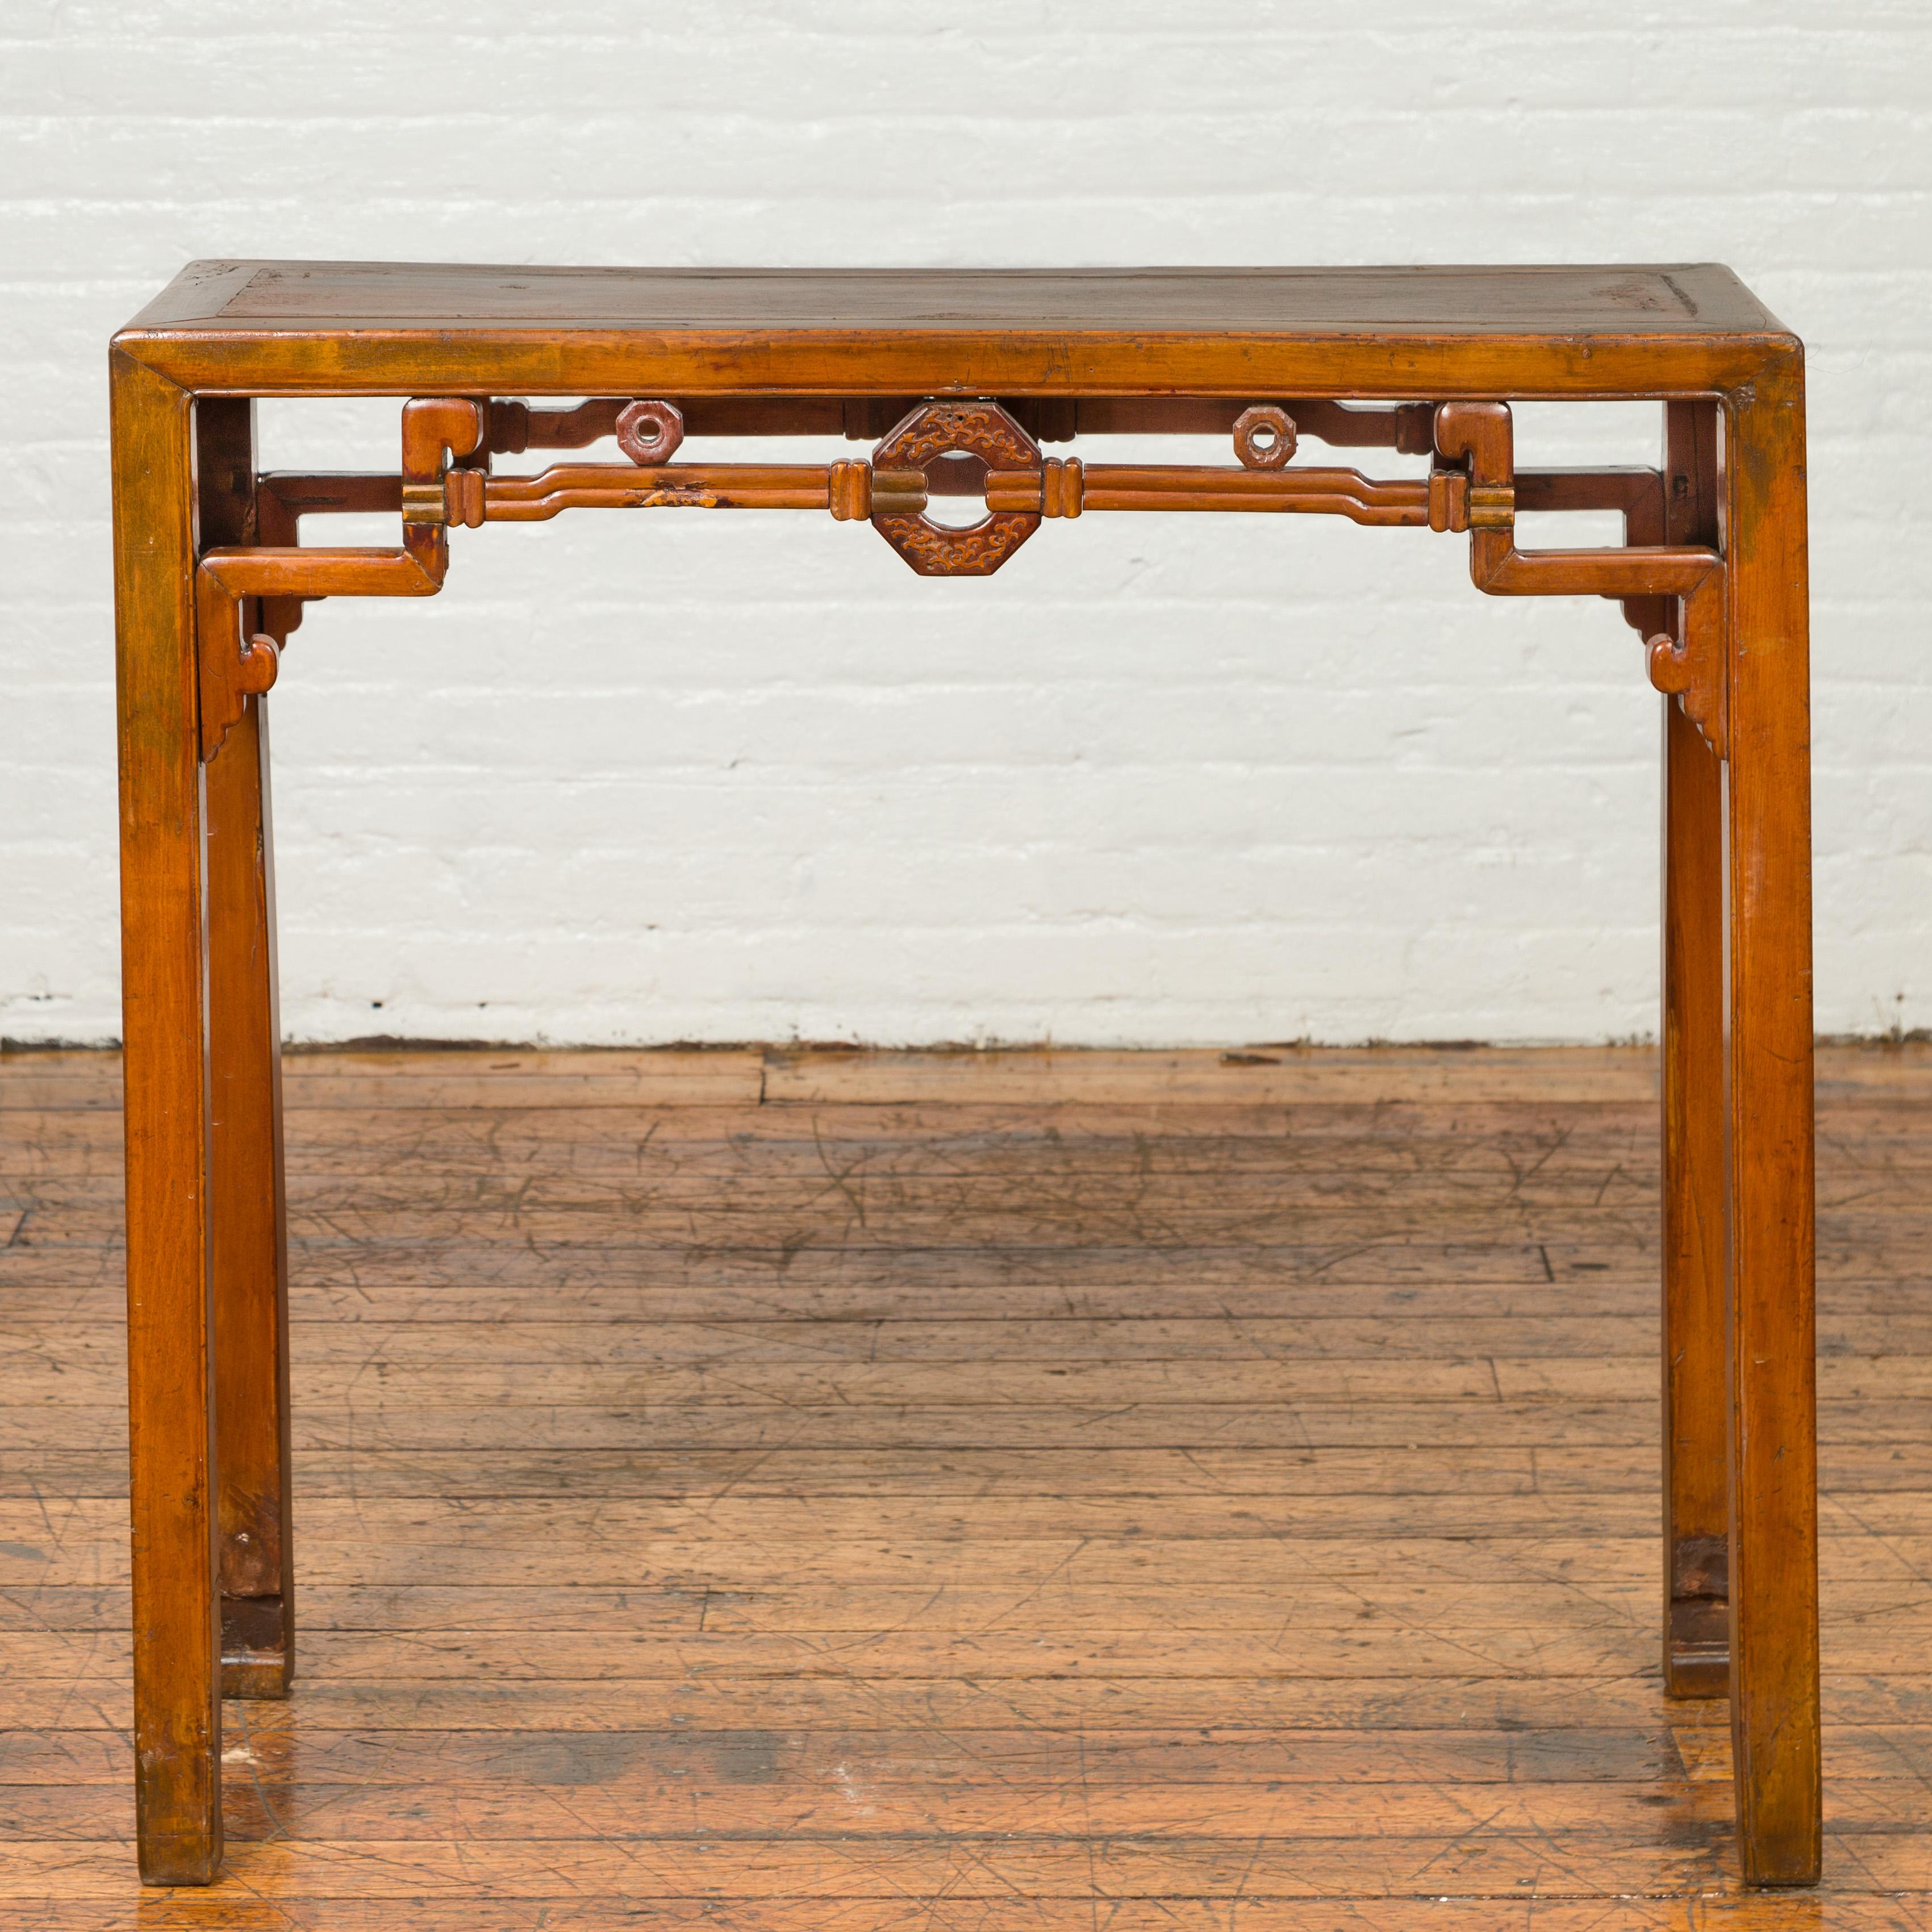 An antique Chinese wooden console table from the early 20th century, with coin patterns and horse-hoofed legs. Charming us with its clean lines and impeccable design, this antique Chinese altar console table features a rectangular top with central